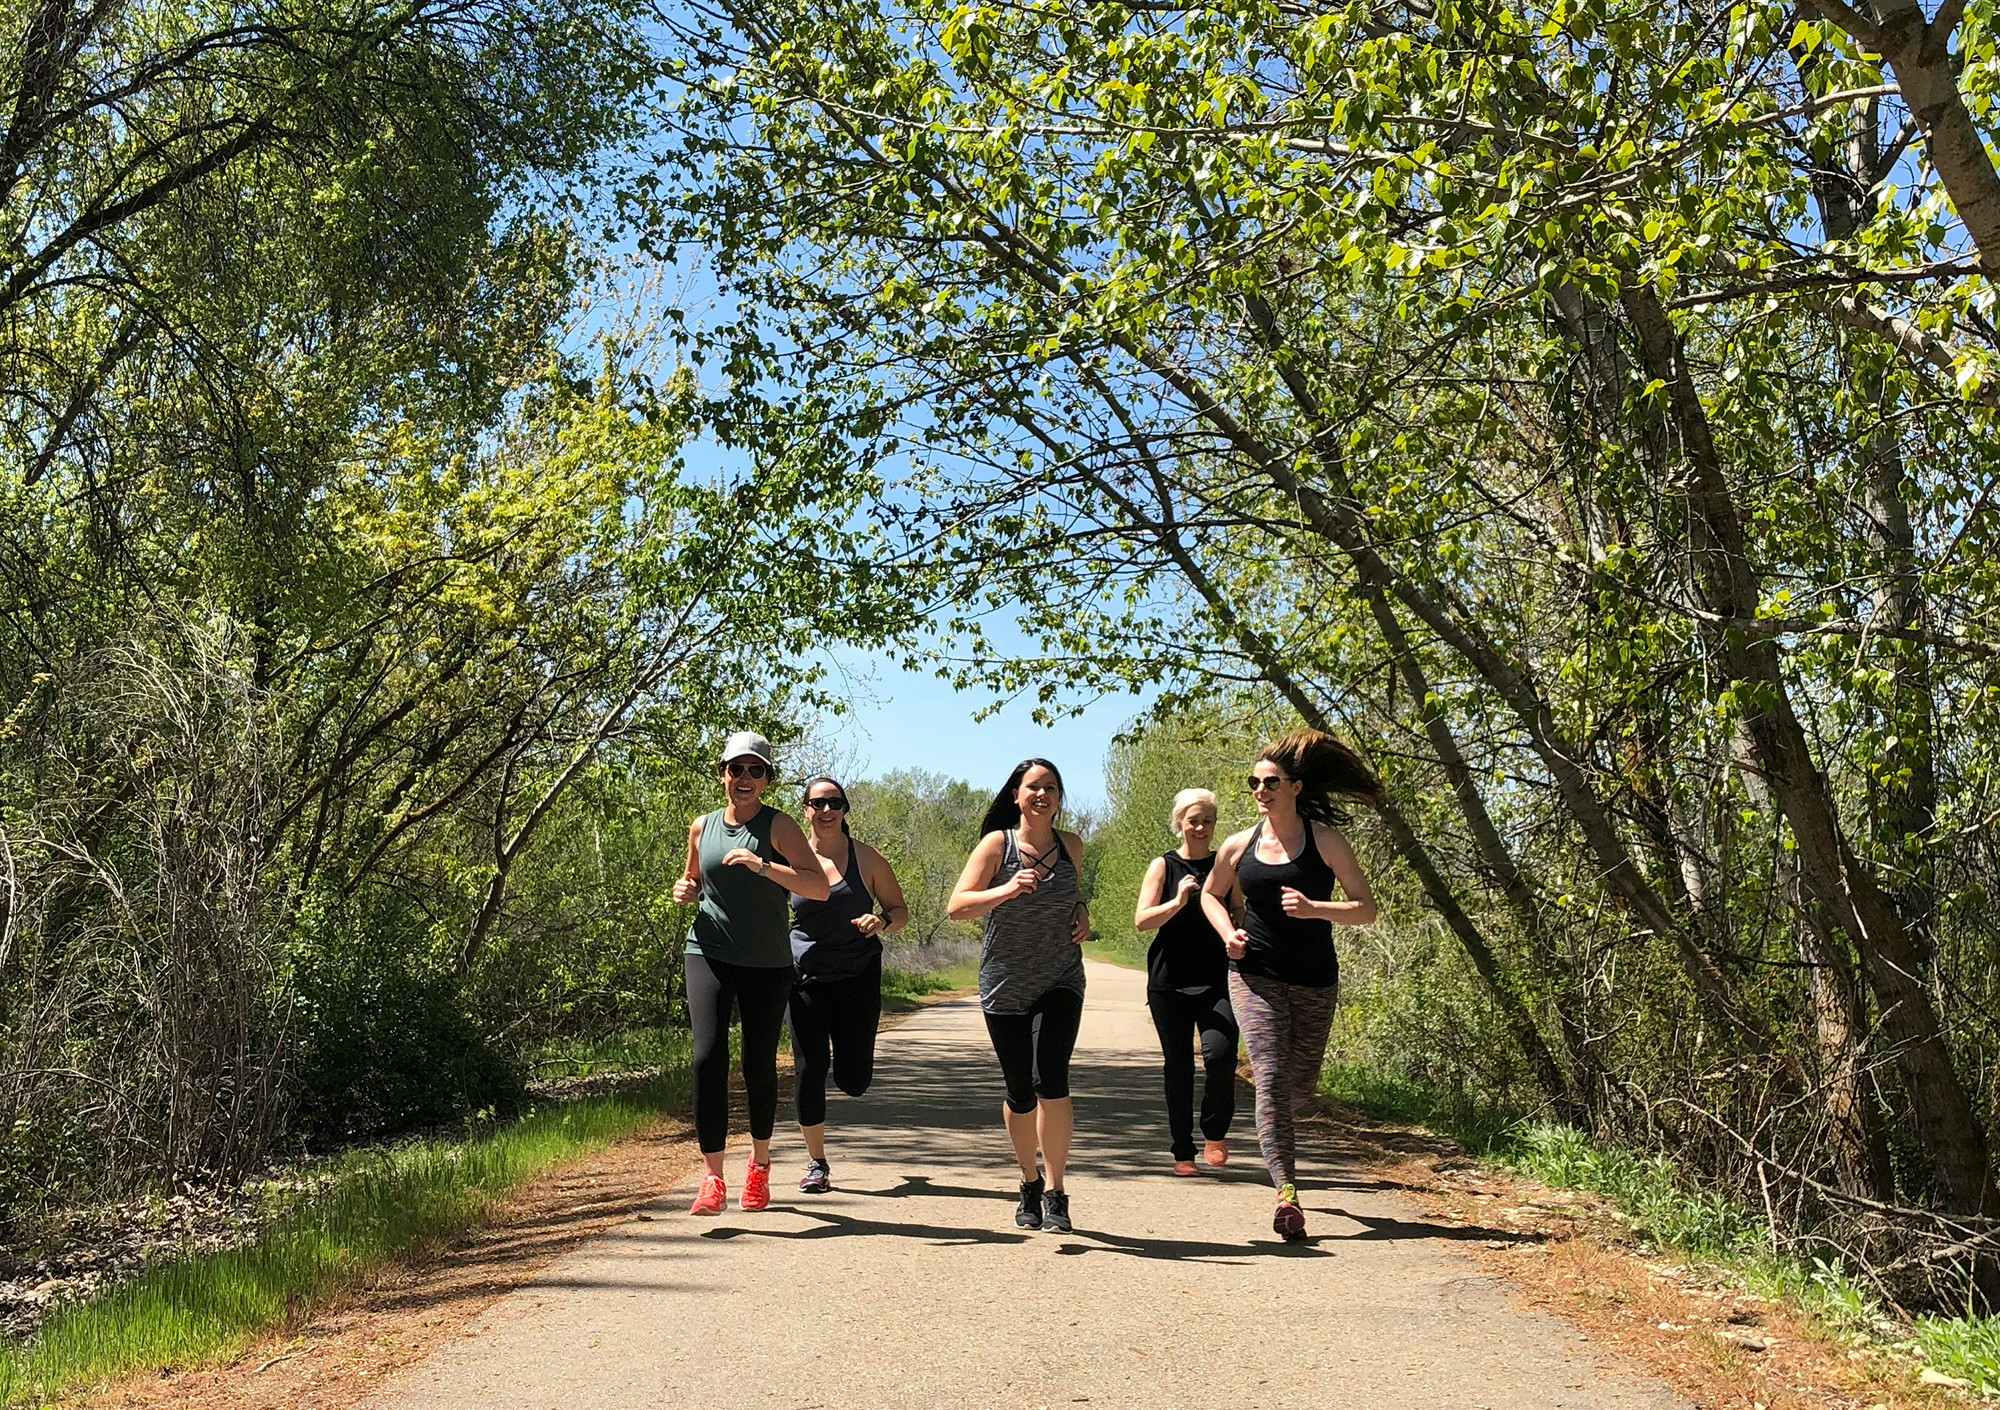 Group of young women running together outside in nature